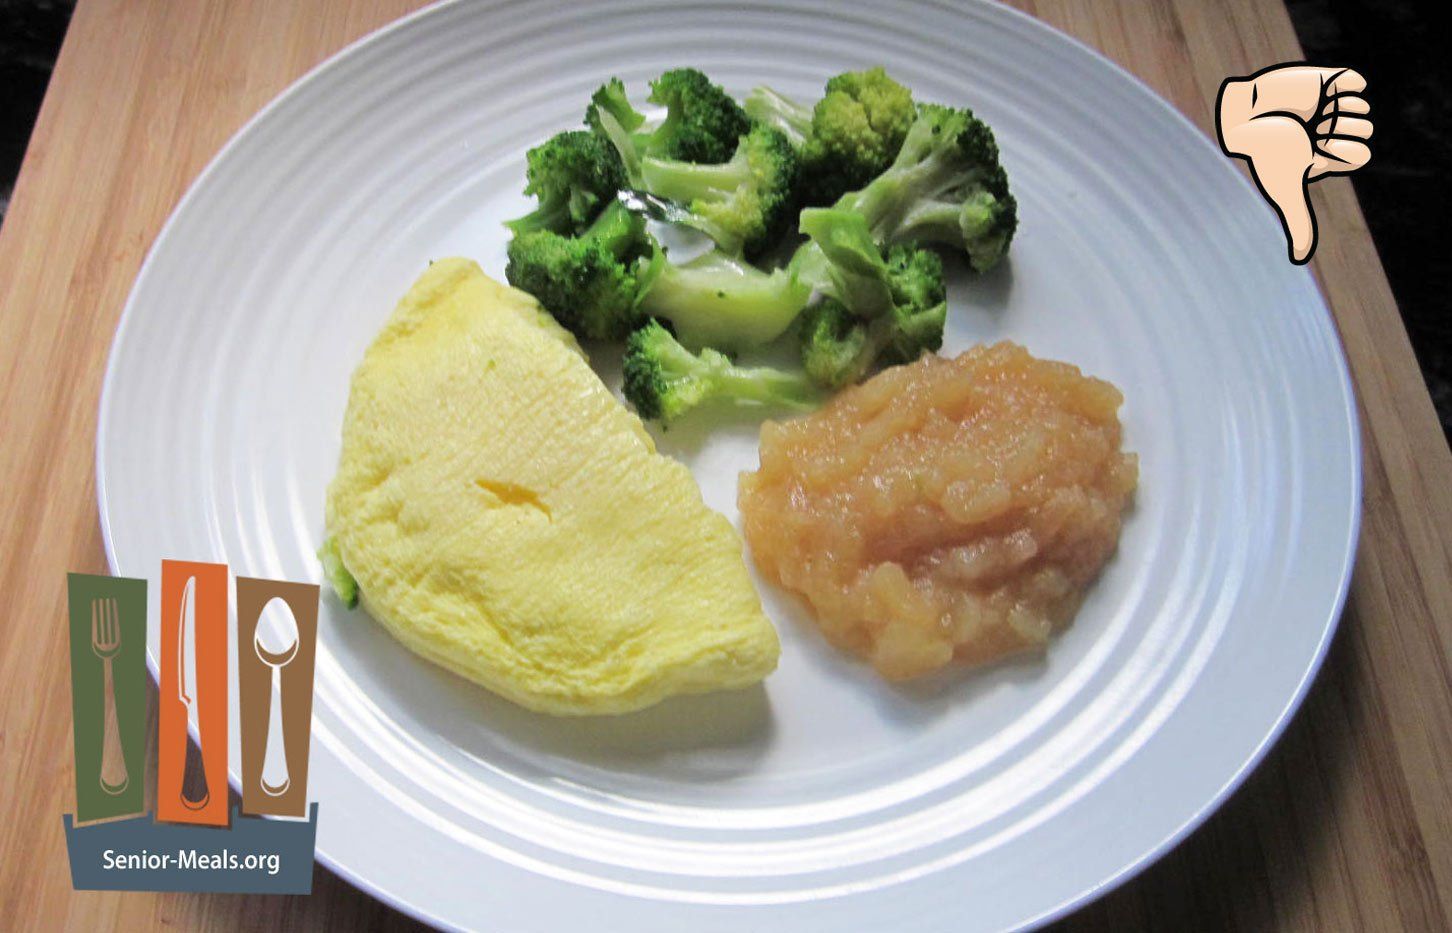 Cheese Omelet with Cinnamon Apples and Broccoli?